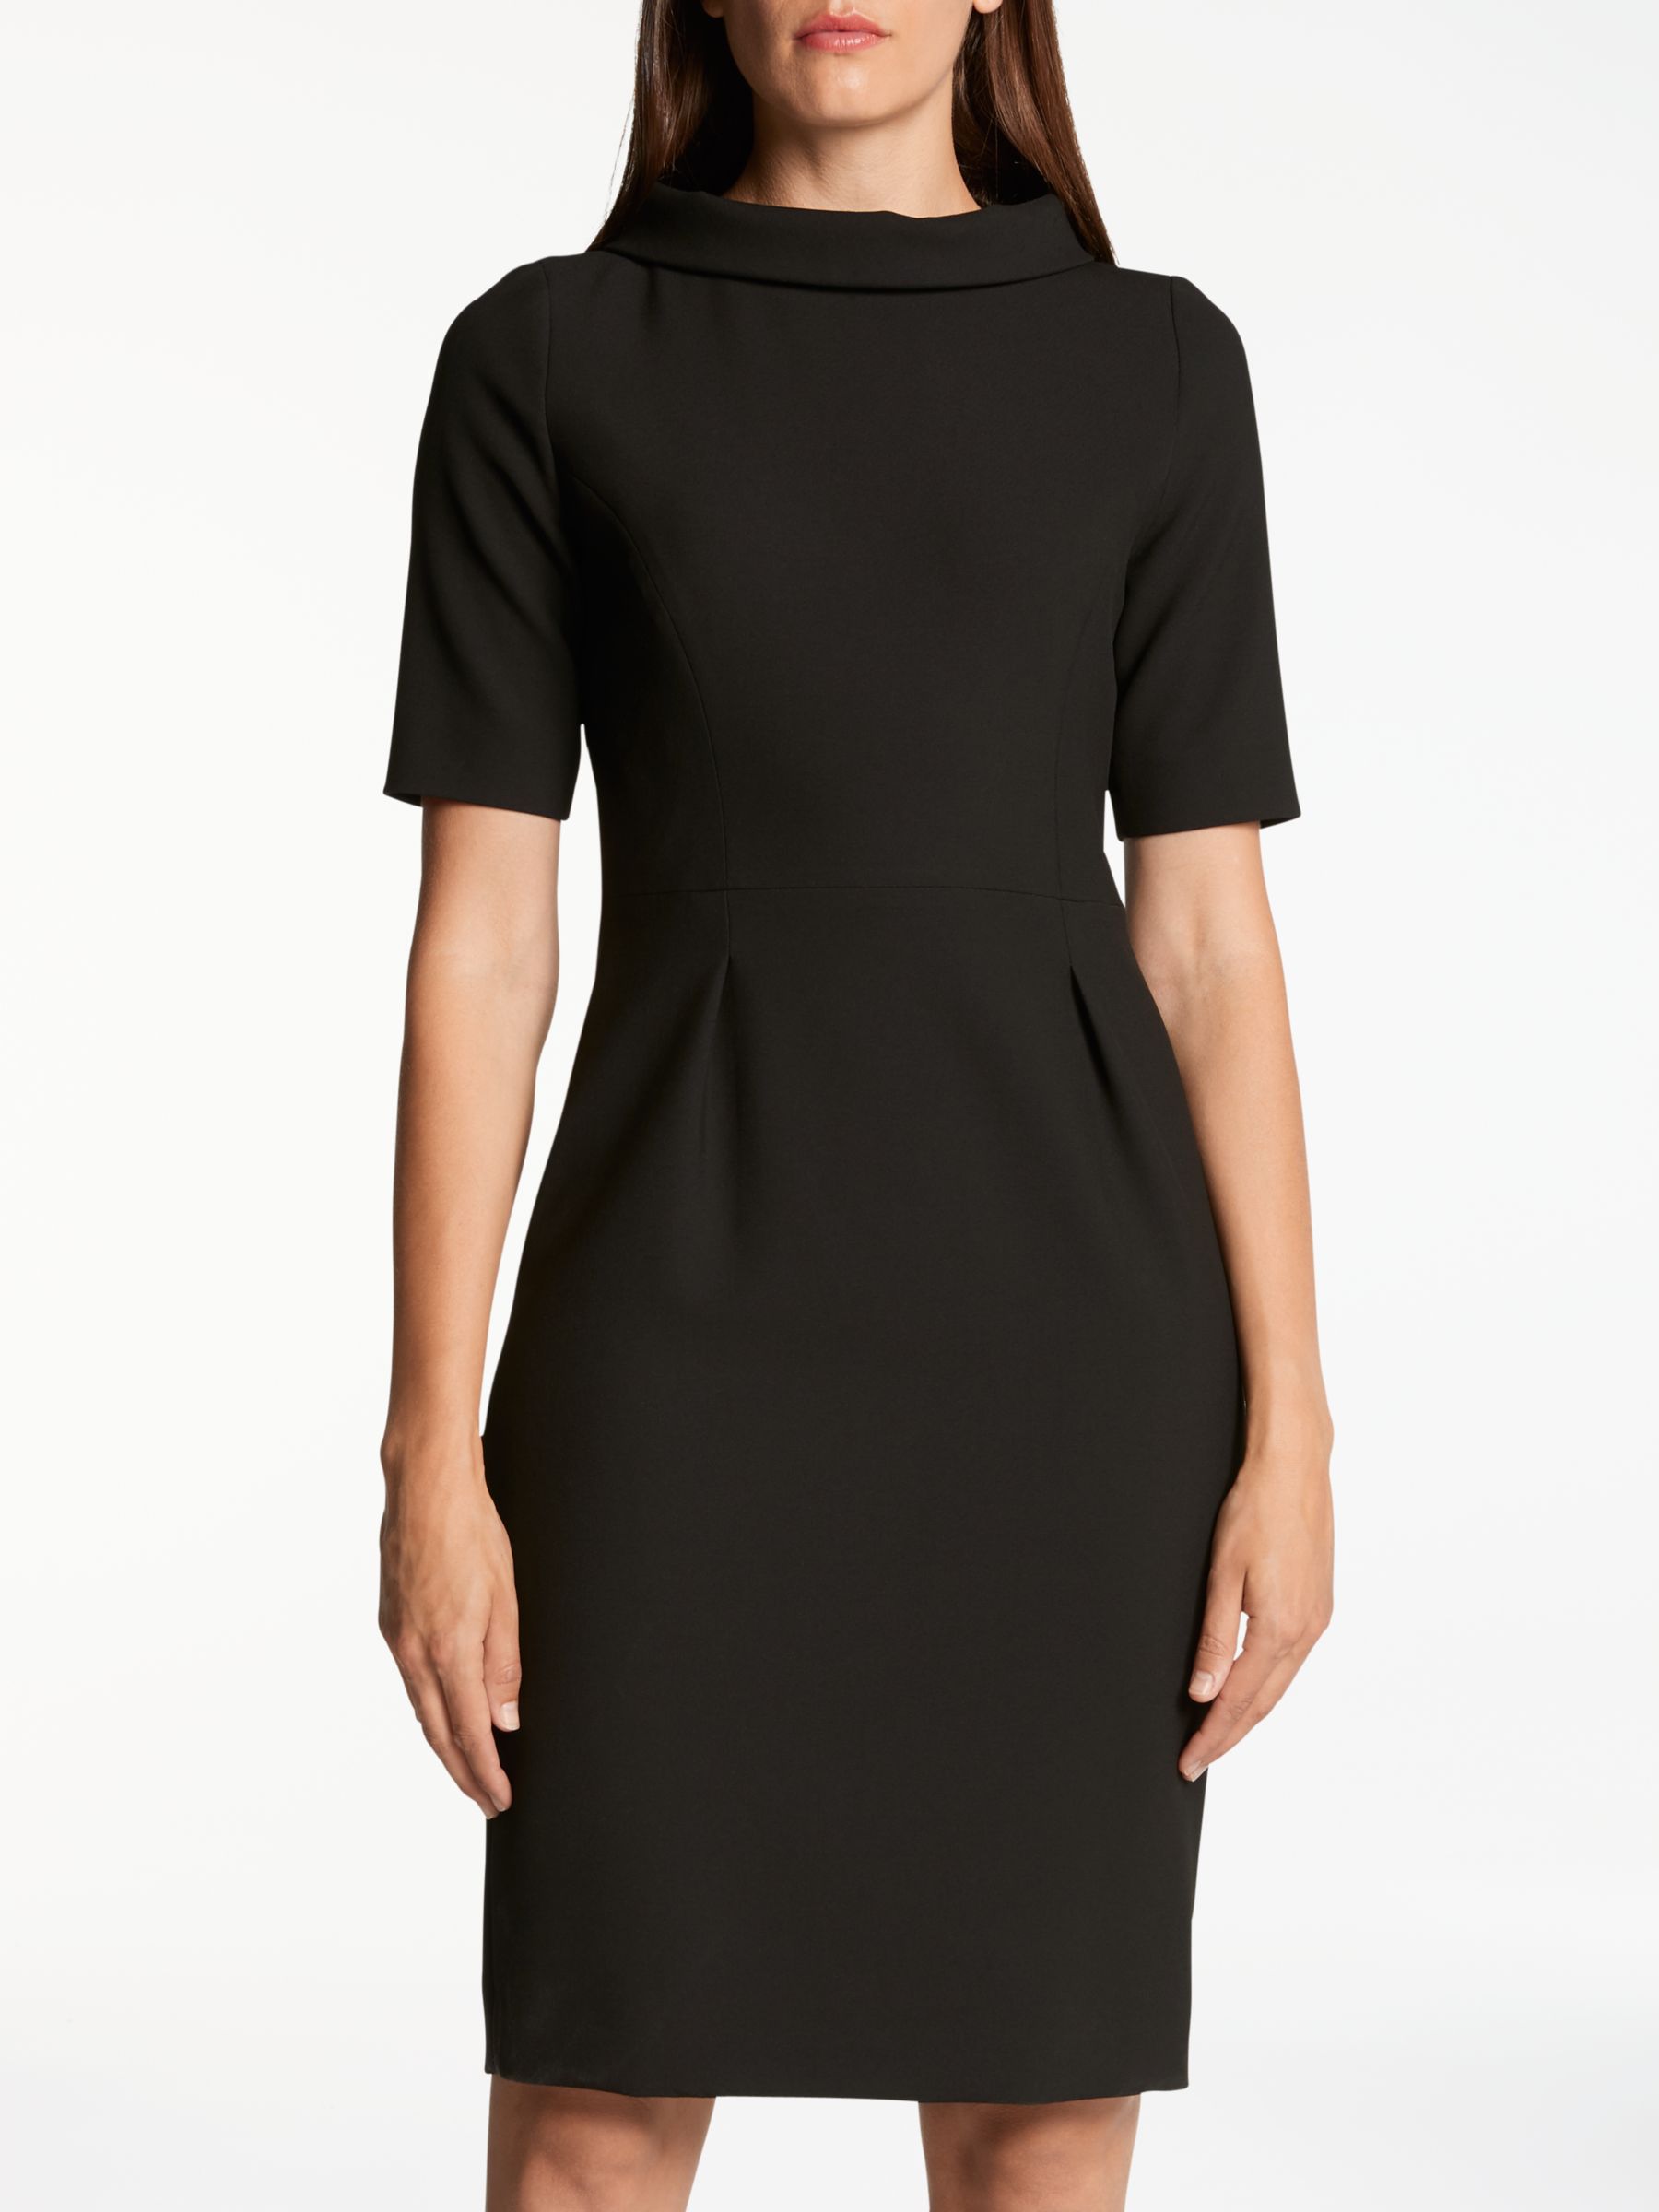 Bruce by Bruce Oldfield Picture Collar Dress, Black, 14